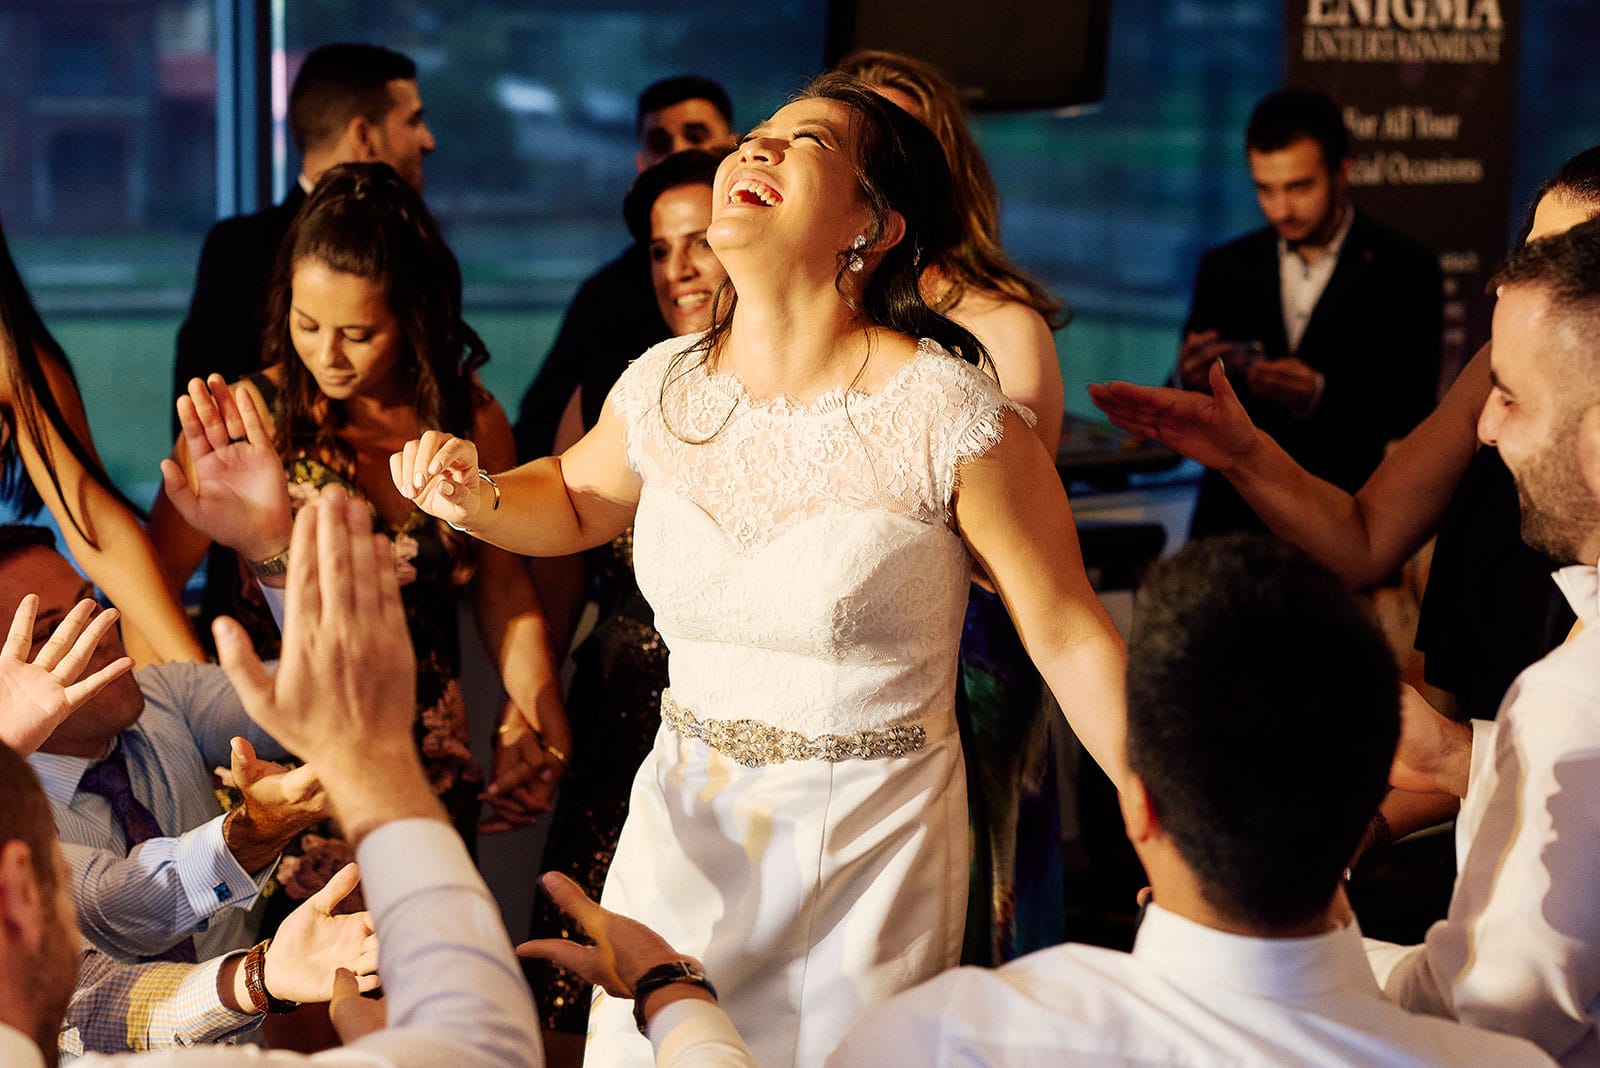 Bride's happiness during wedding reception